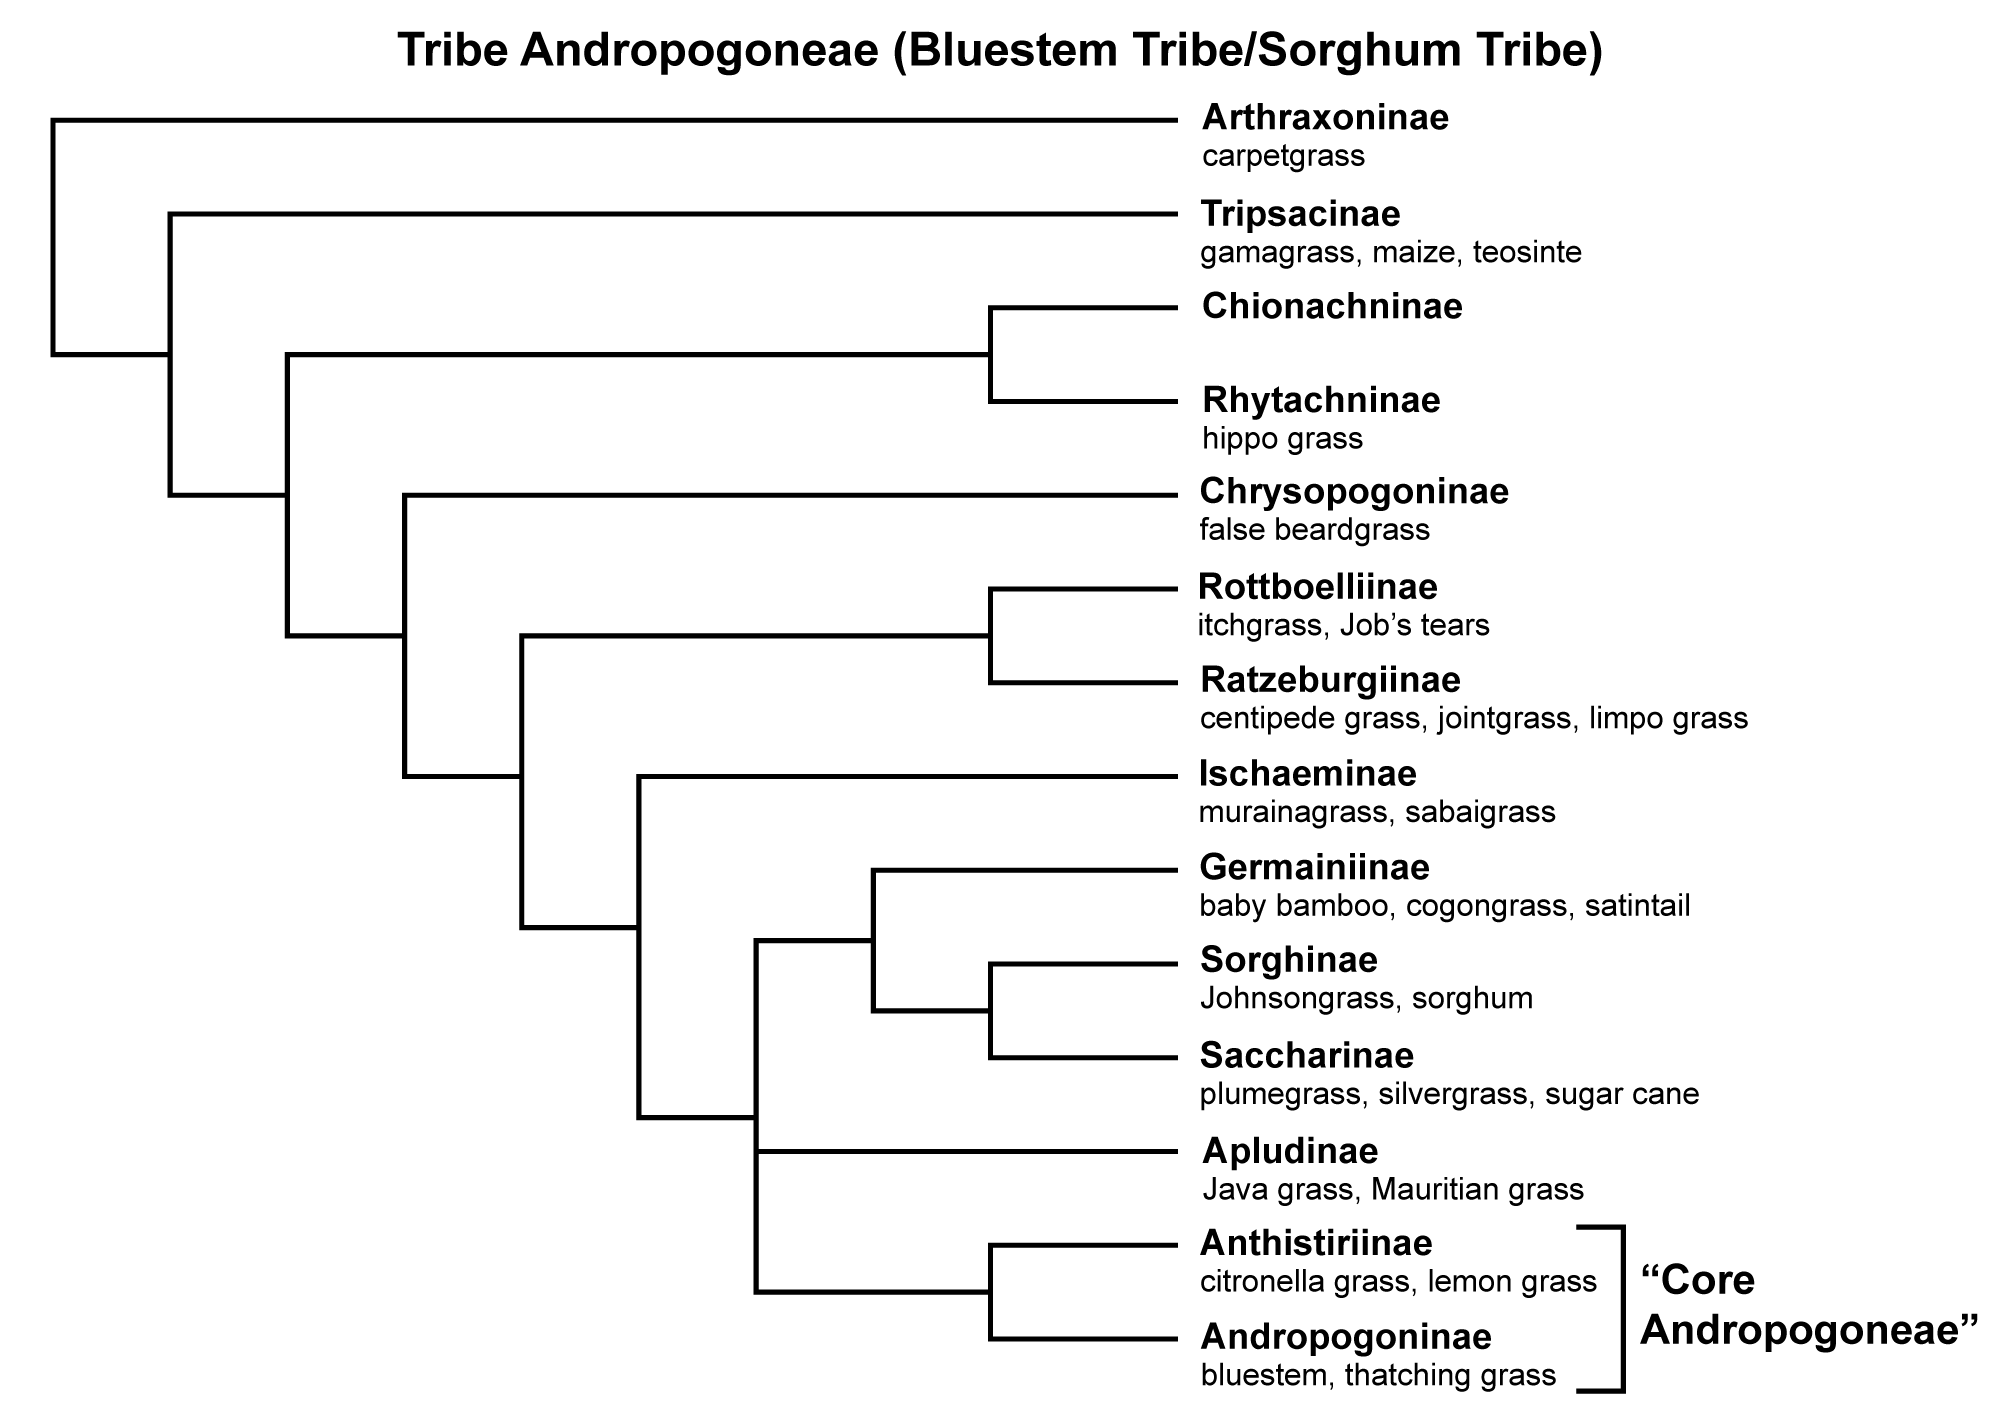 Diagram showing the relationships among the subtribes of grasses in Tribe Andropogoneae, with common names of examples of grasses in each subtribe listed below the subtribe names.